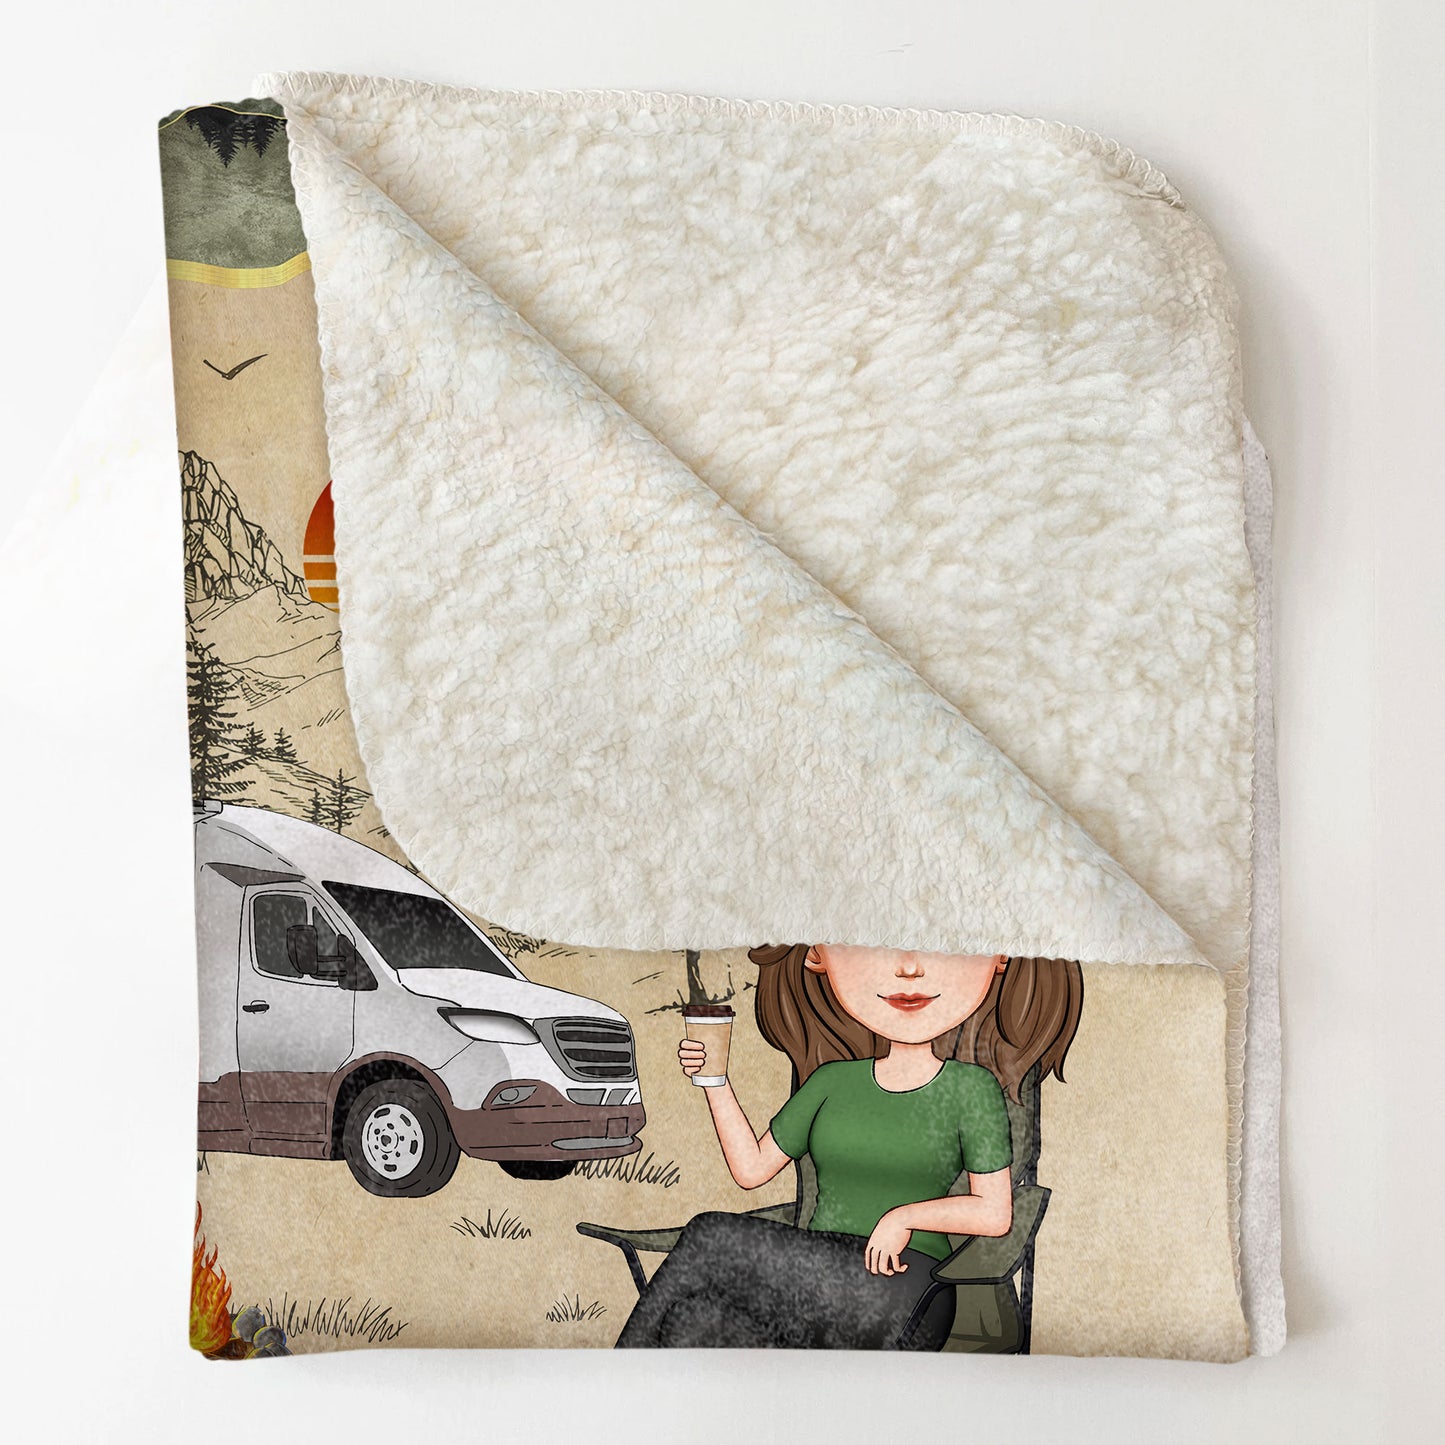 My Campfire And Coffee Blanket - Personalized Blanket